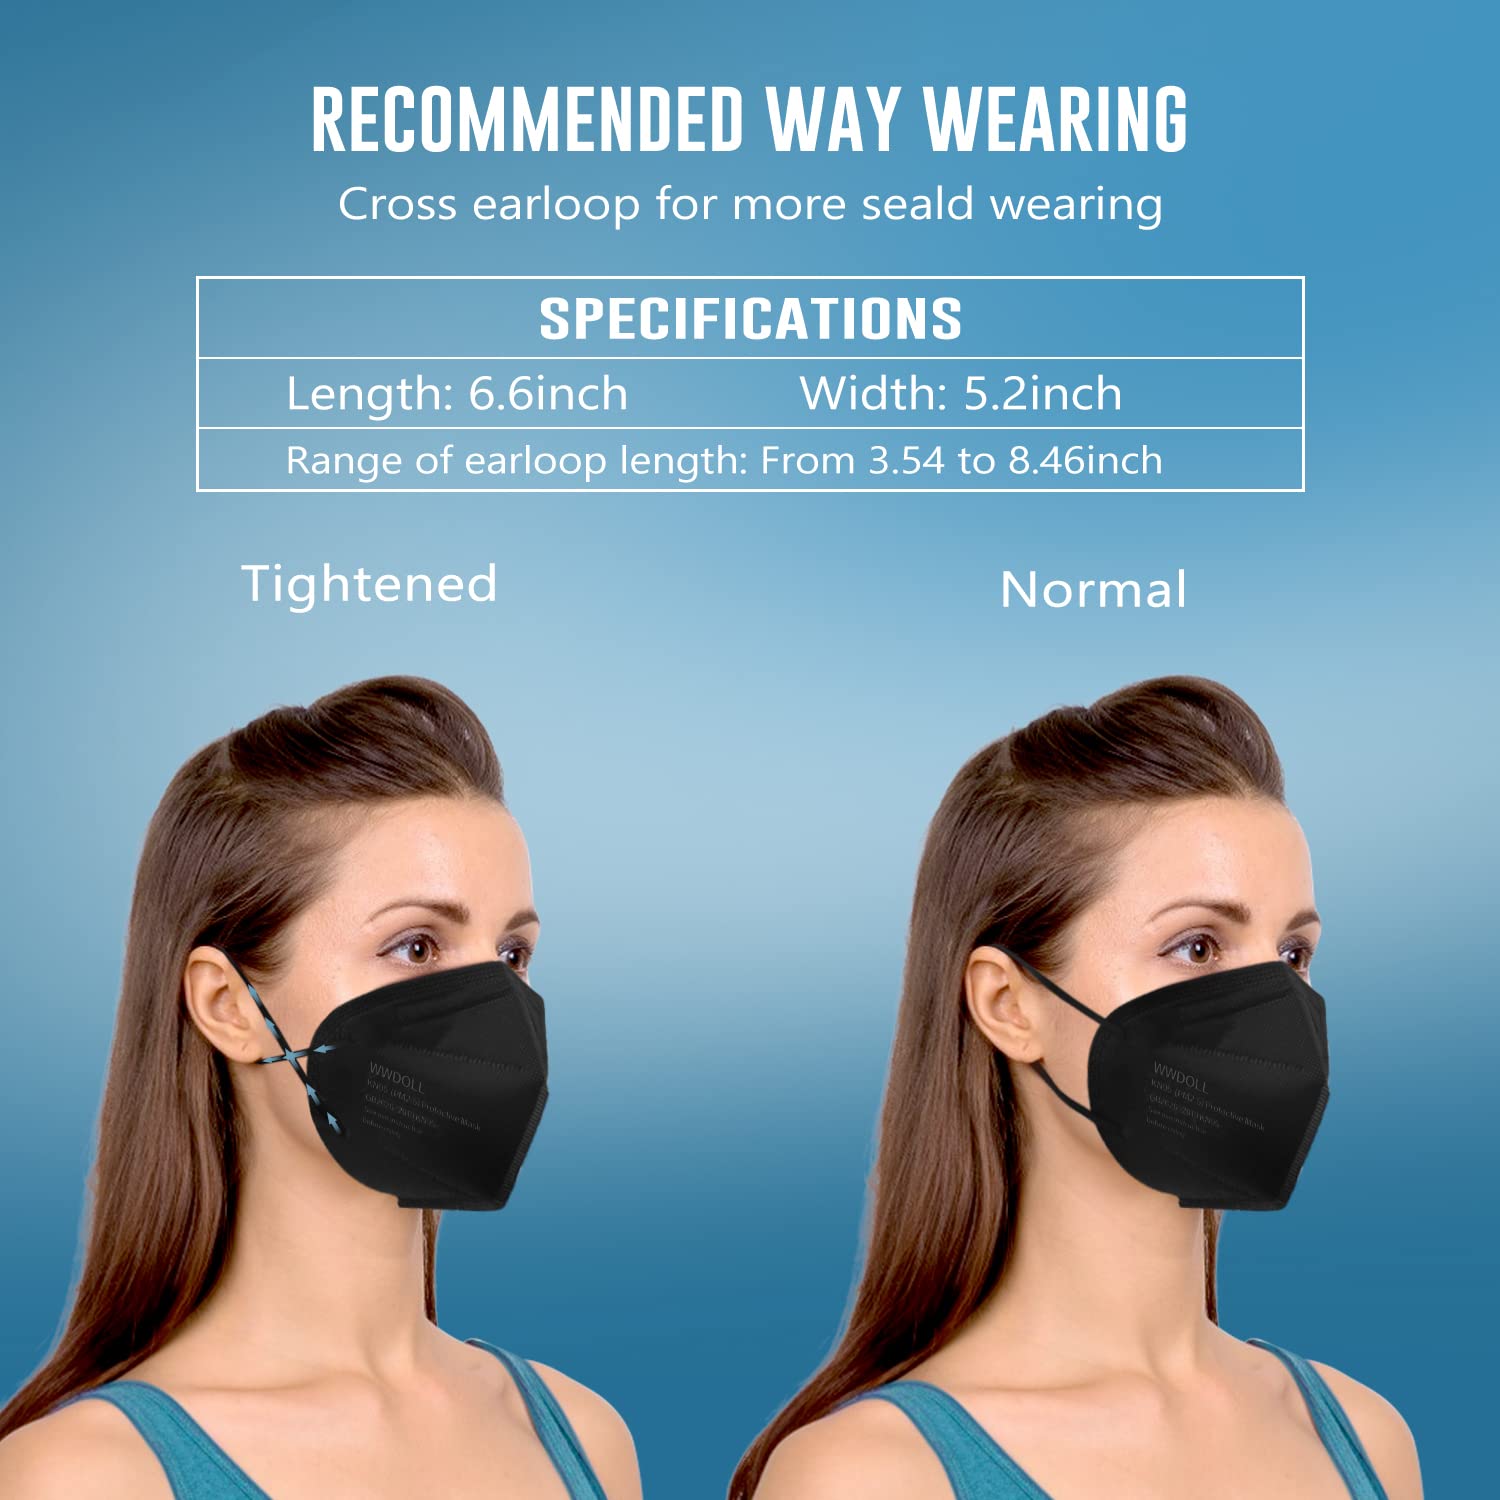 KN95 Face Mask 50 Pack, WWDOLL KN95 Masks 5-Layer Breathable Mask with Elastic Earloop and Nose Bridge Clip, Disposable Respirator Protection Against PM2.5 Black